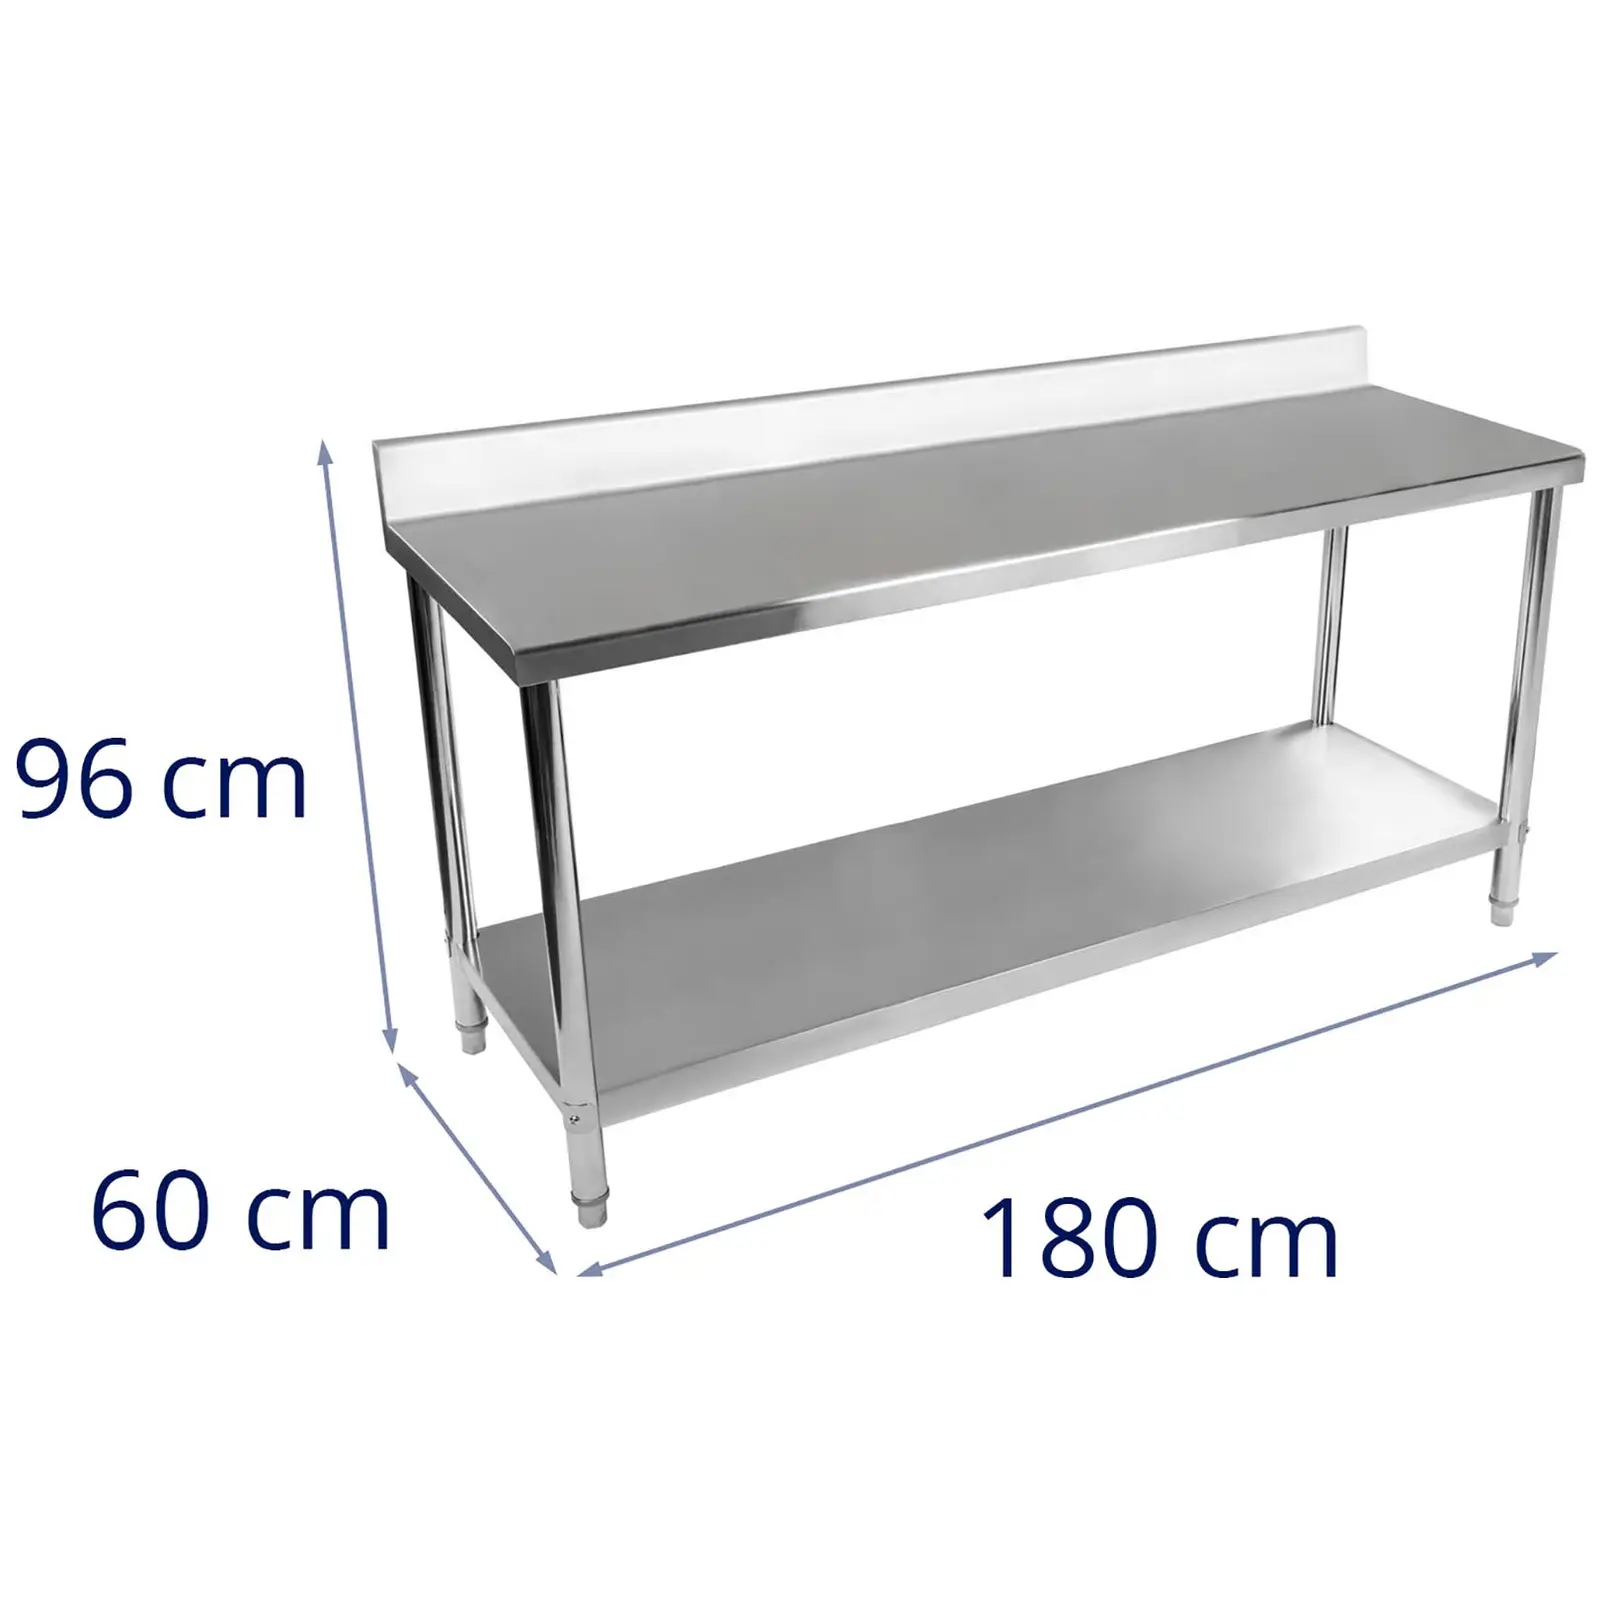 Stainless Steel Table - 180 x 60 cm - Upstand - 182 kg carrying capacity